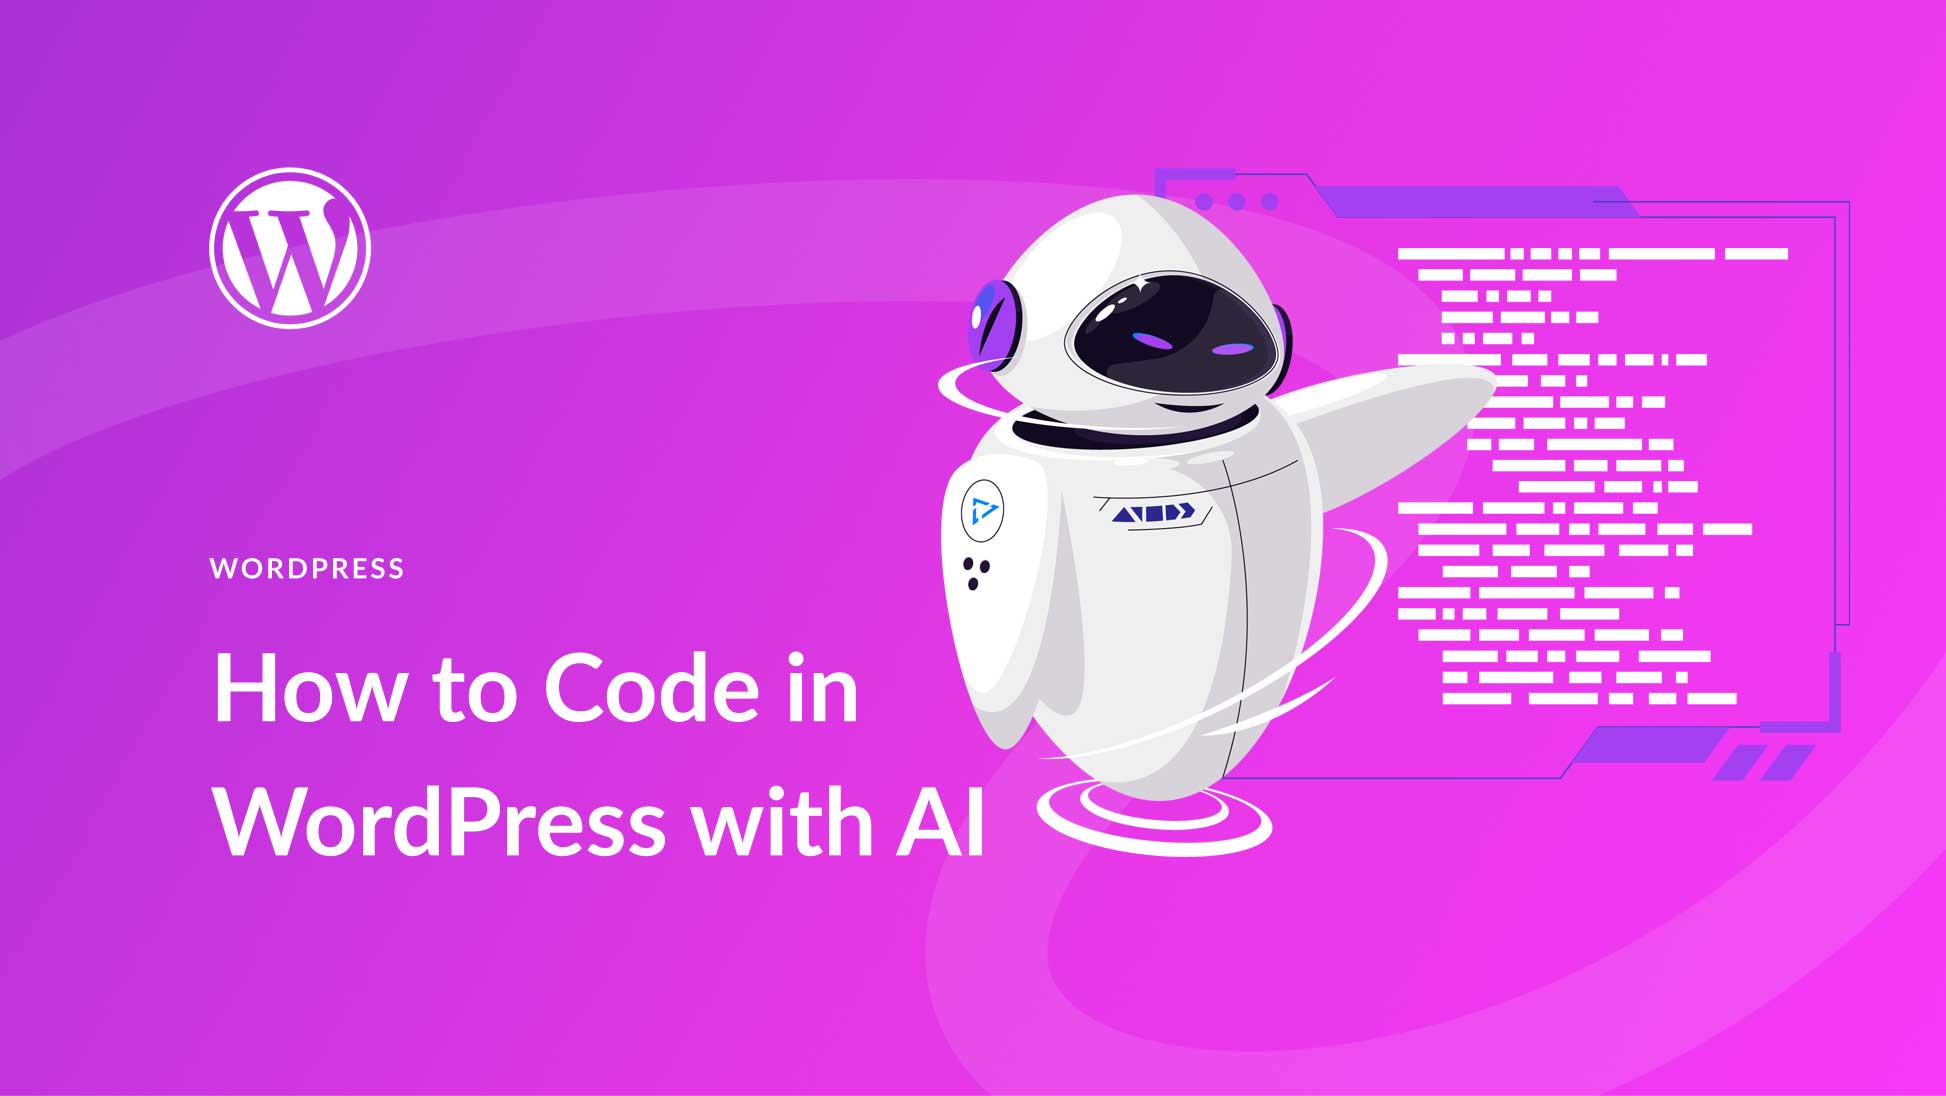 How to Code in WordPress with AI